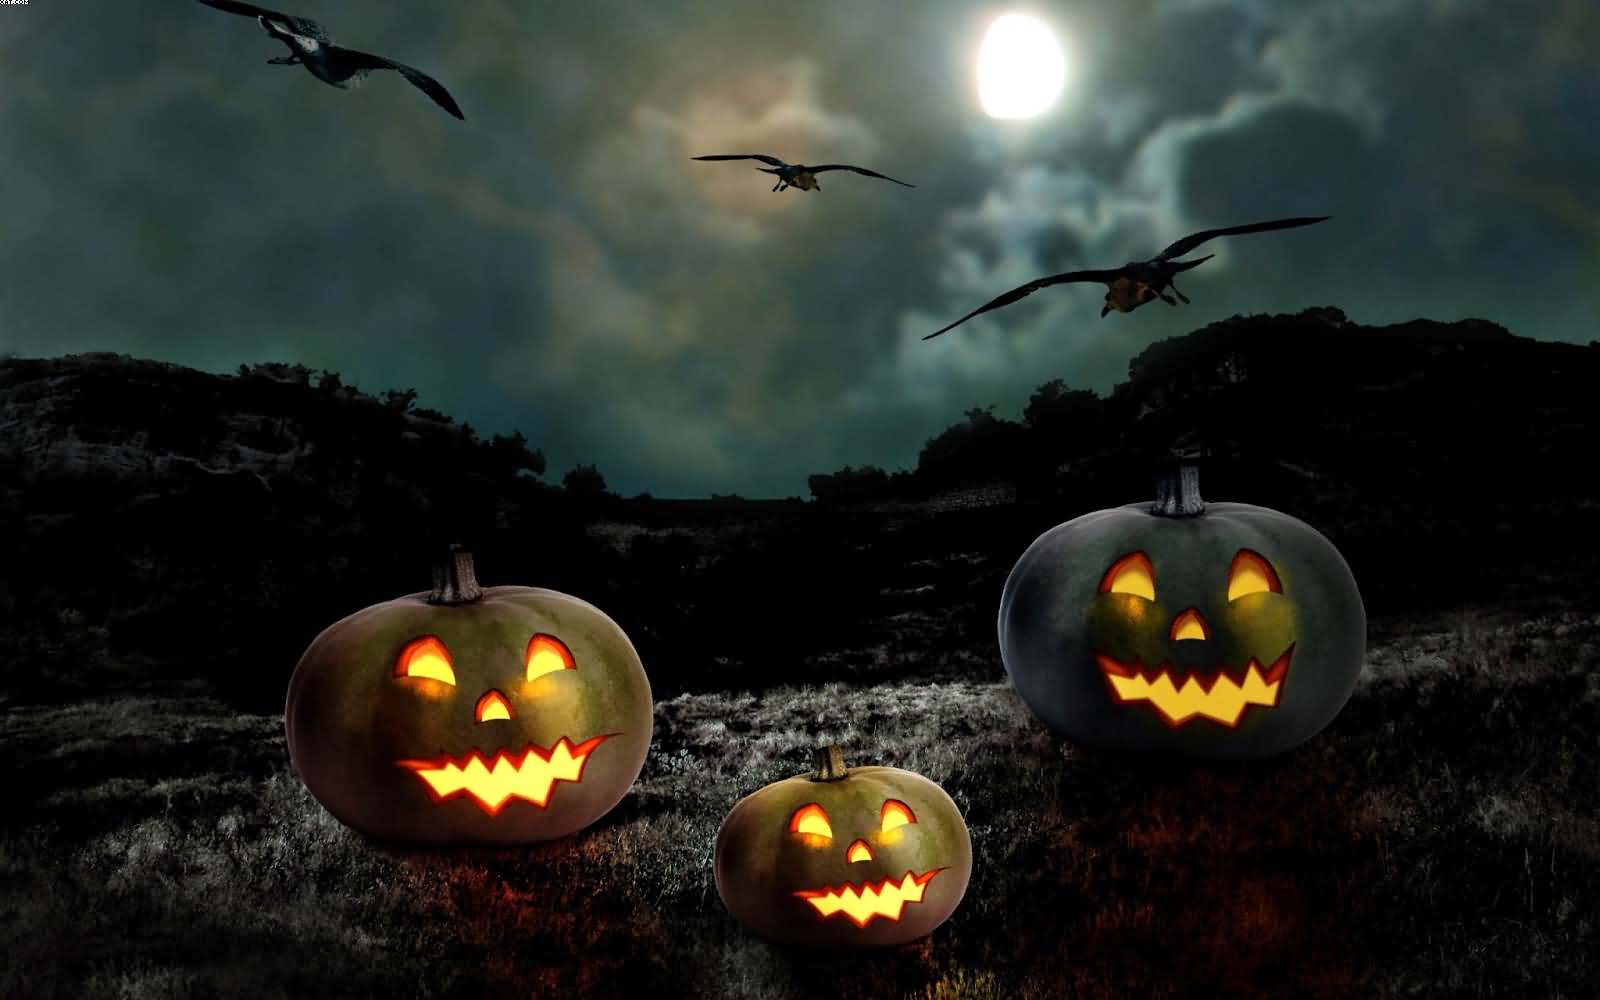 Halloween wishes with decorated pumpkins image